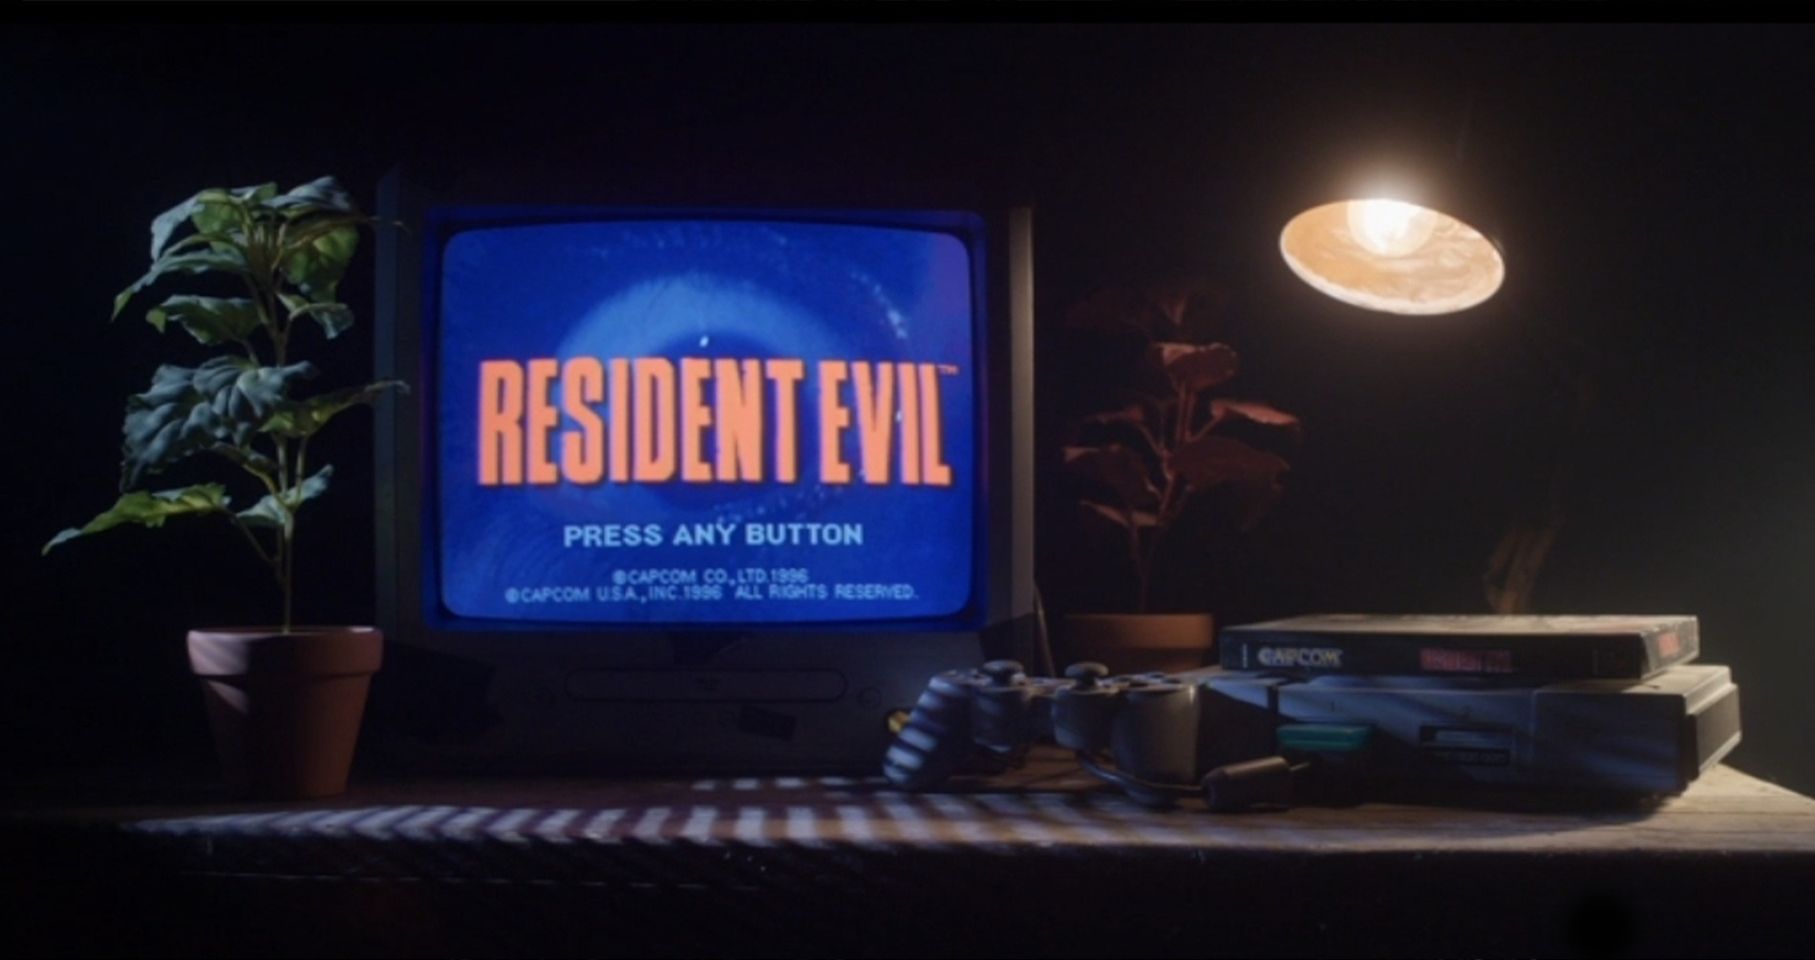 A vintage TV showcasing the start screen of the popular video game "Resident Evil", teamed with a gaming console, a table lamp, and surrounded by lush potted plants for an atmospheric home gaming experience.